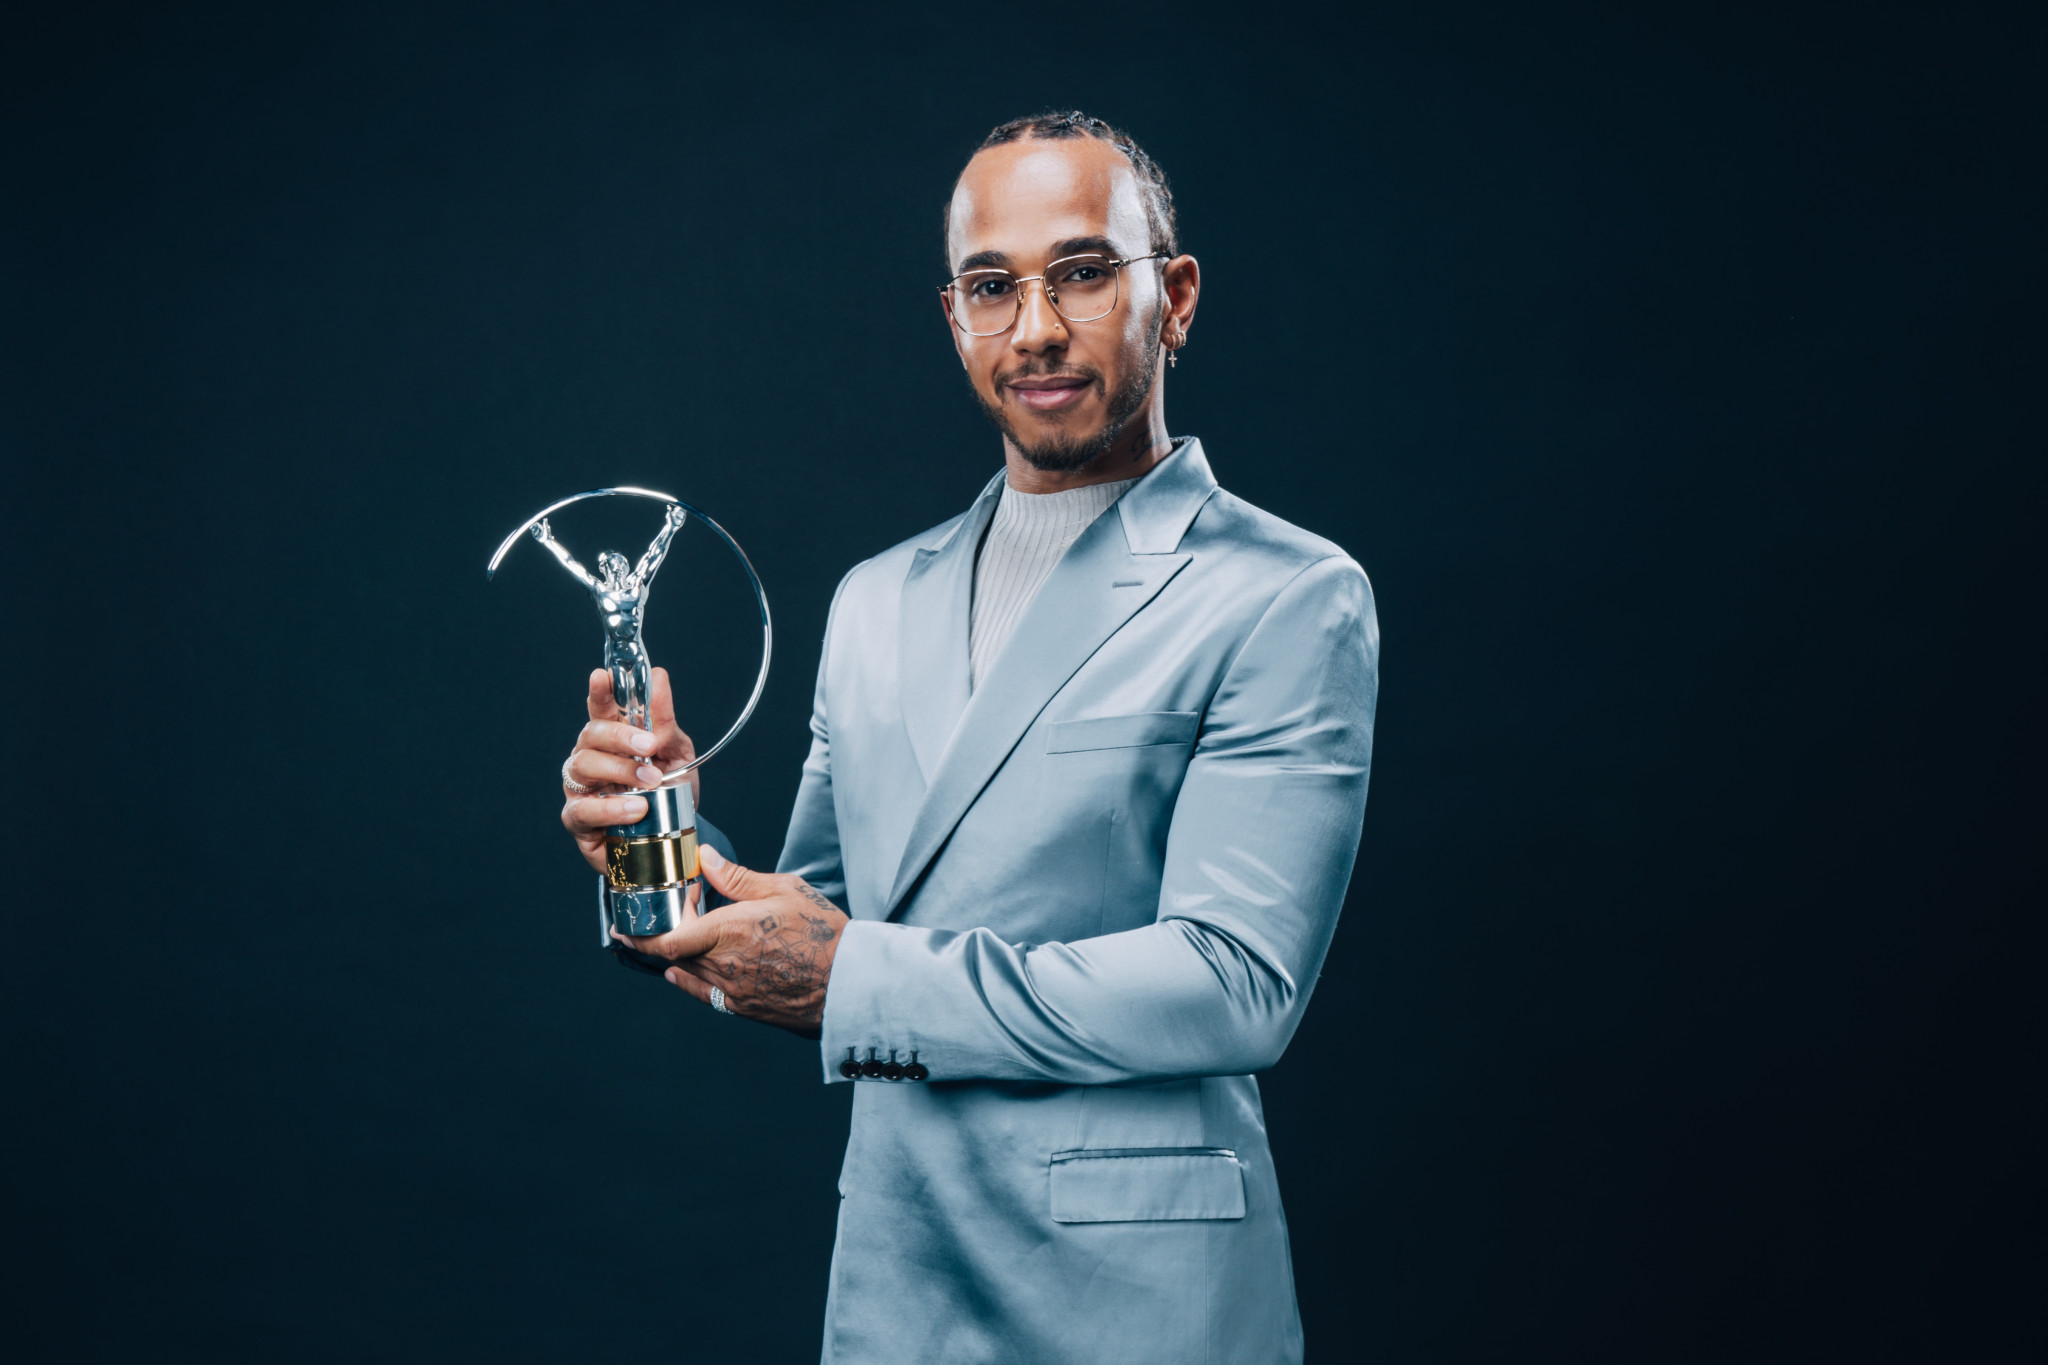 Hamilton and Messi share Laureus award in historic first